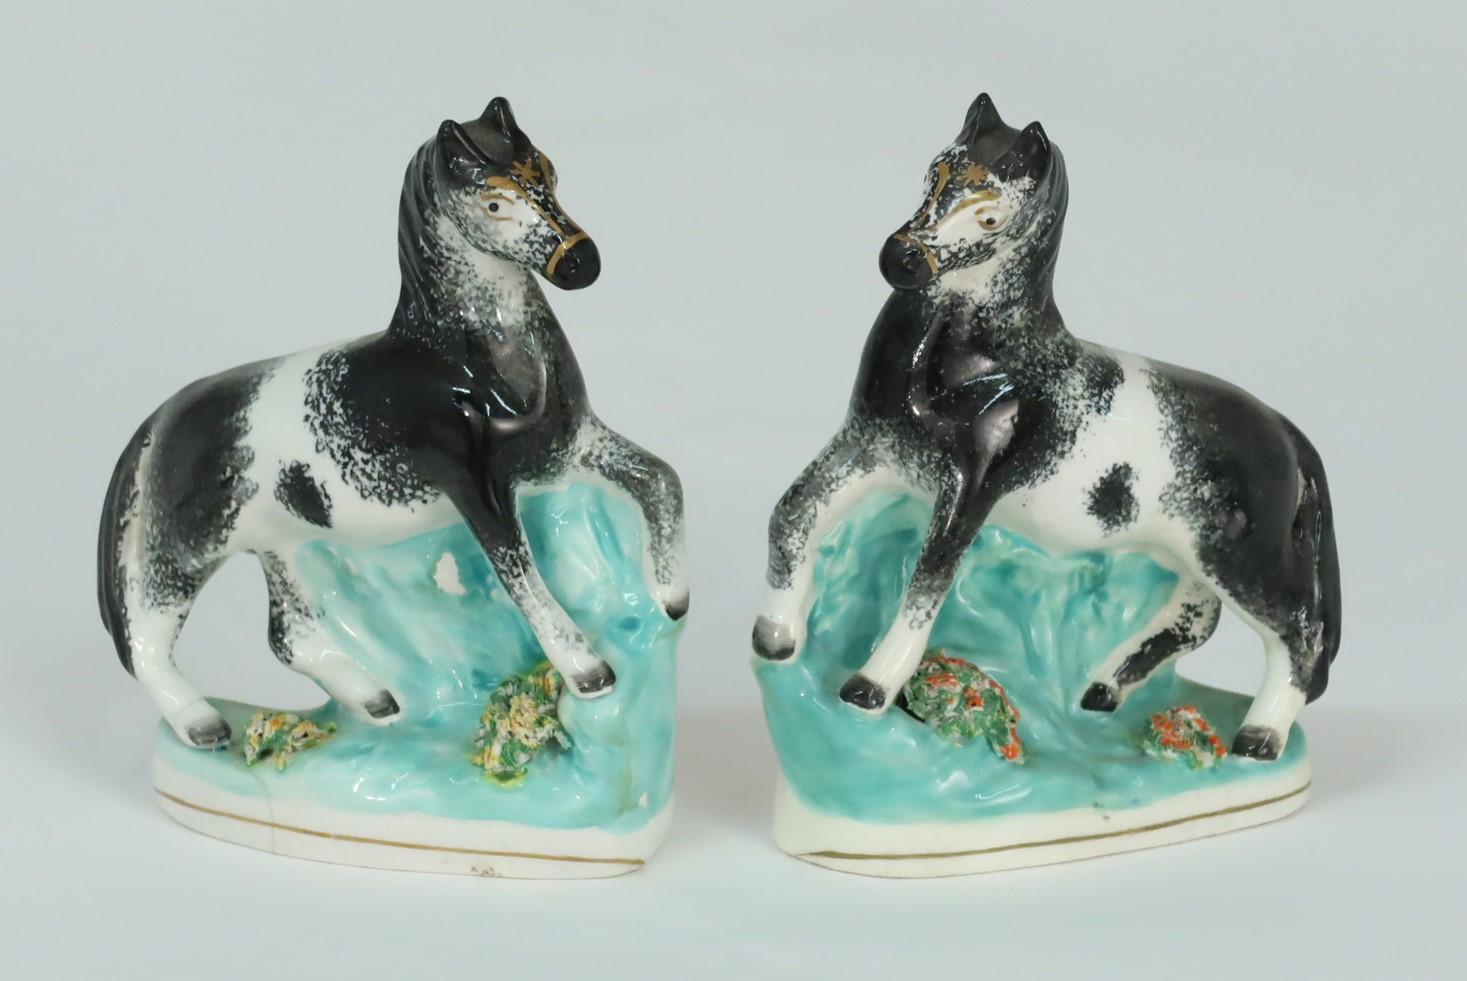 A charming pair of antique English Staffordshire black and white horses with unusual gilt decoration to their faces, circa 1850 (From the owner's private collection).